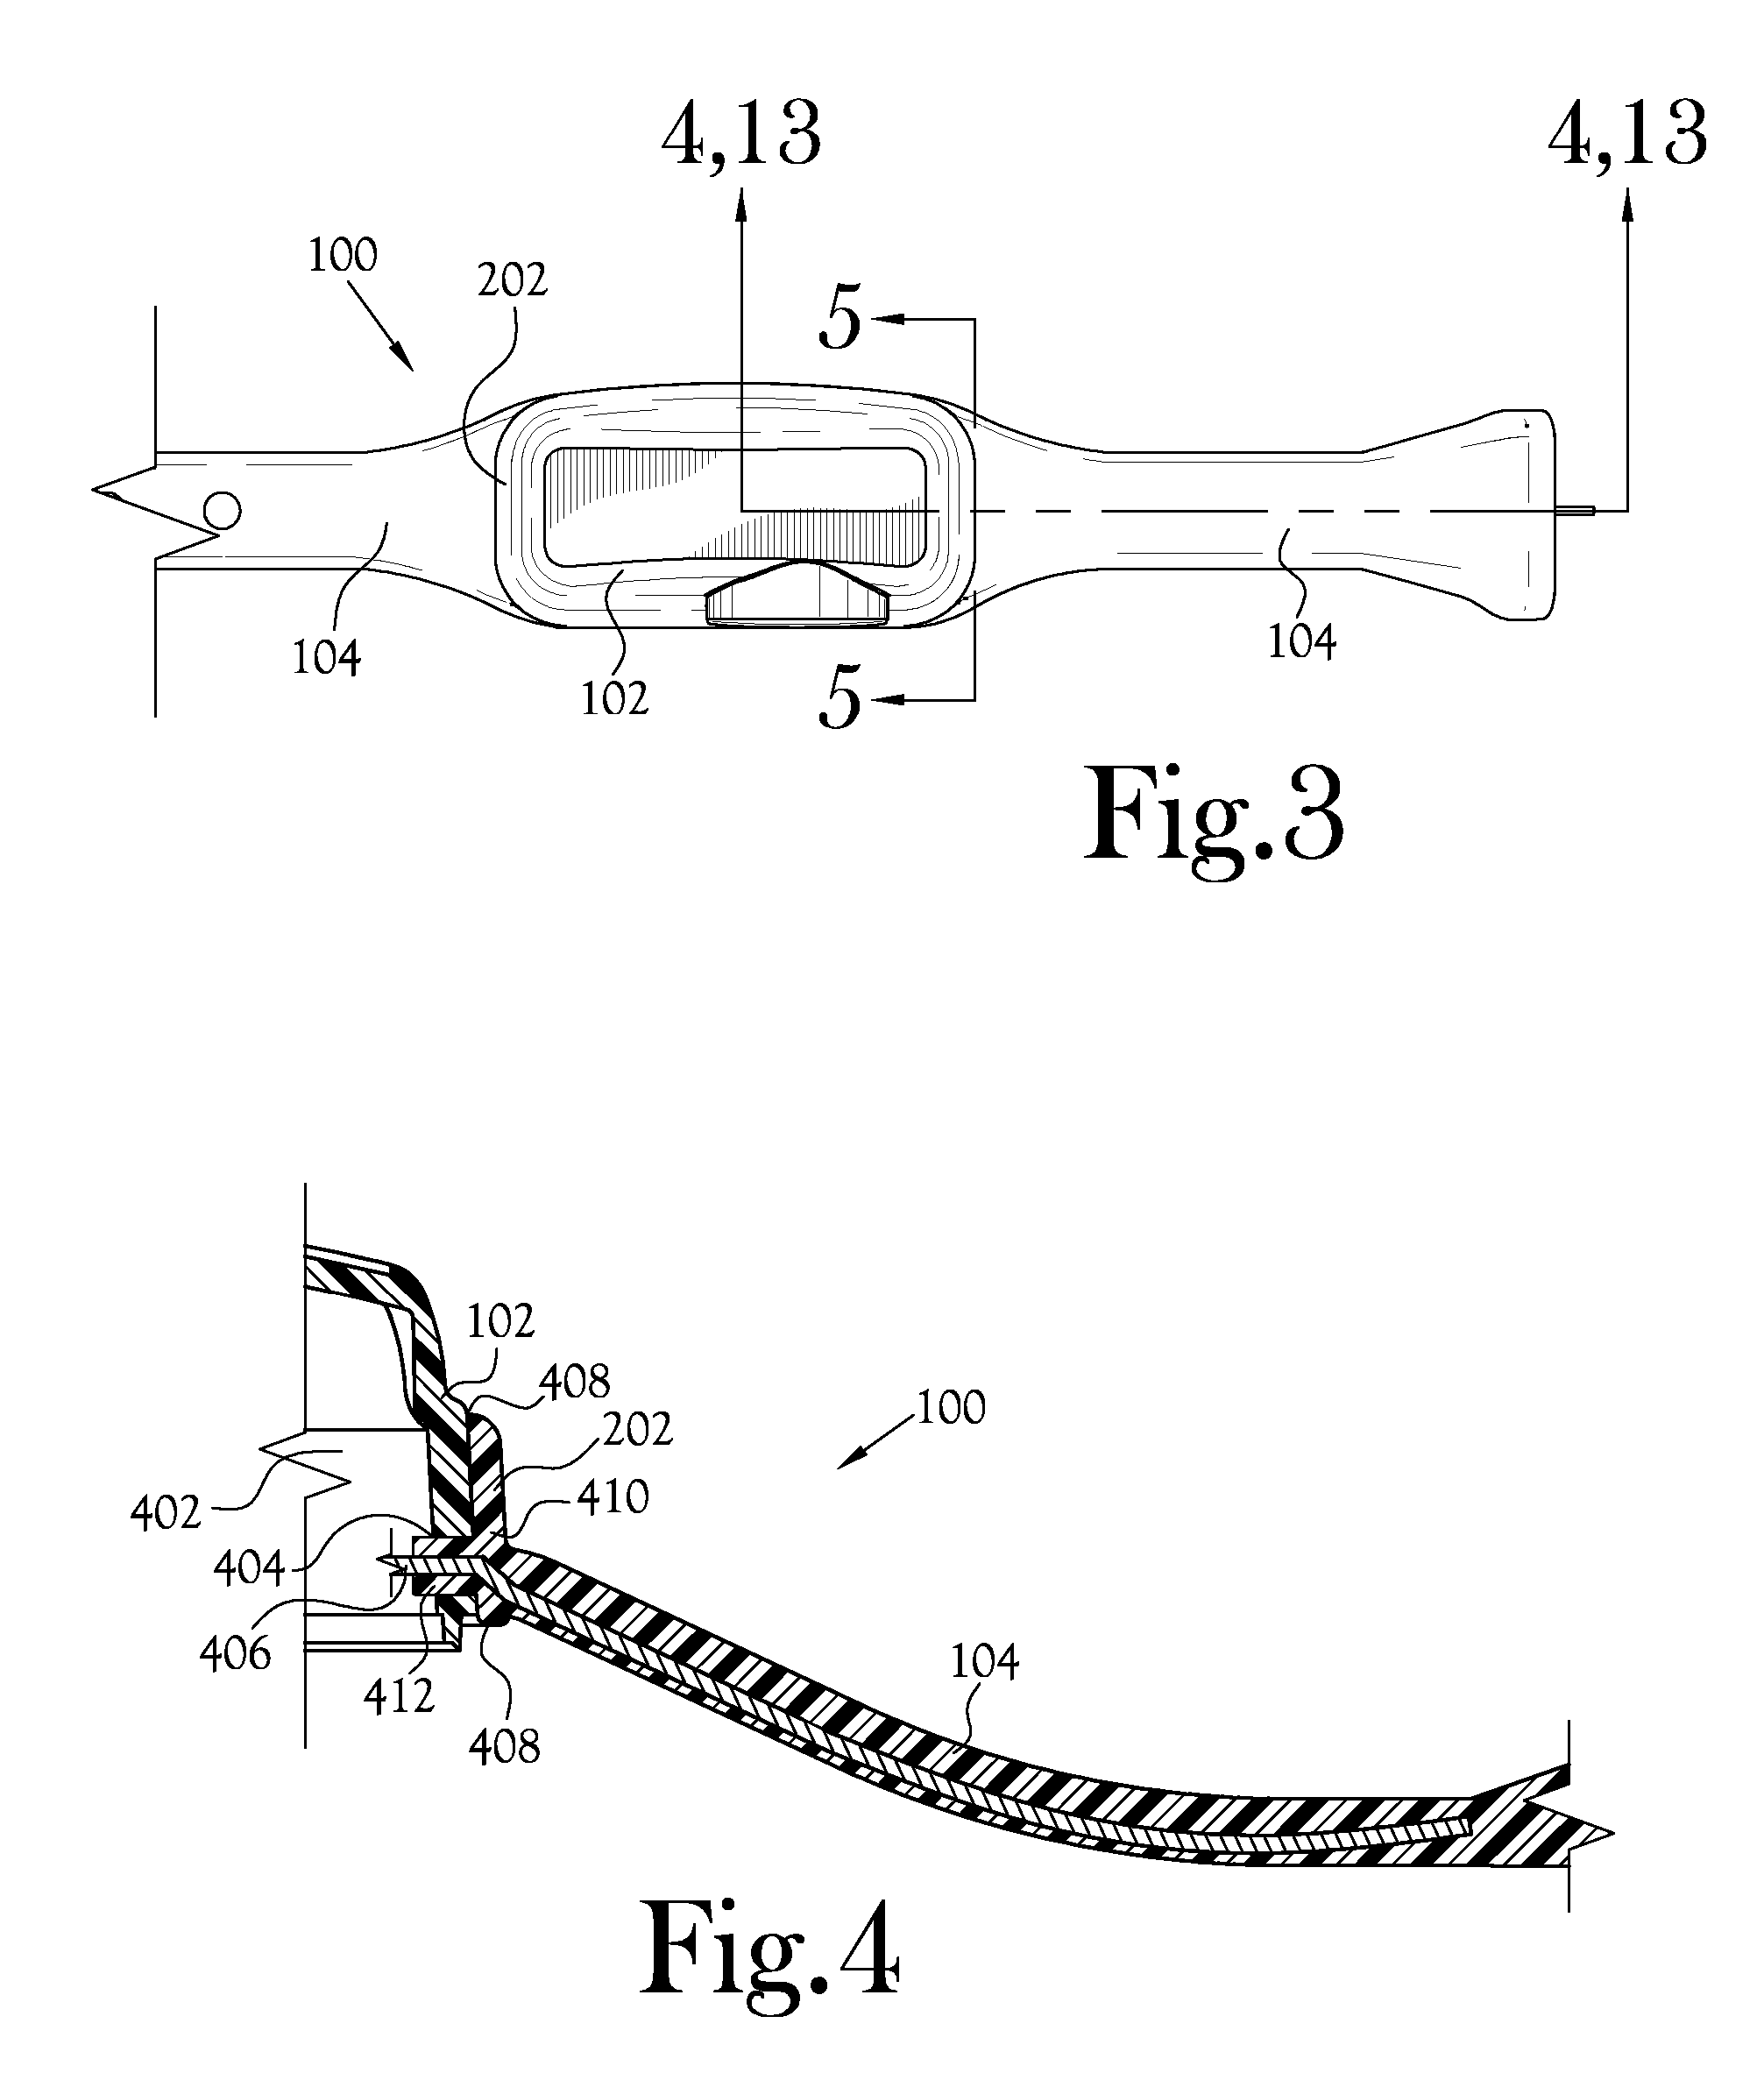 Antenna Enclosed Within an Animal Training Apparatus